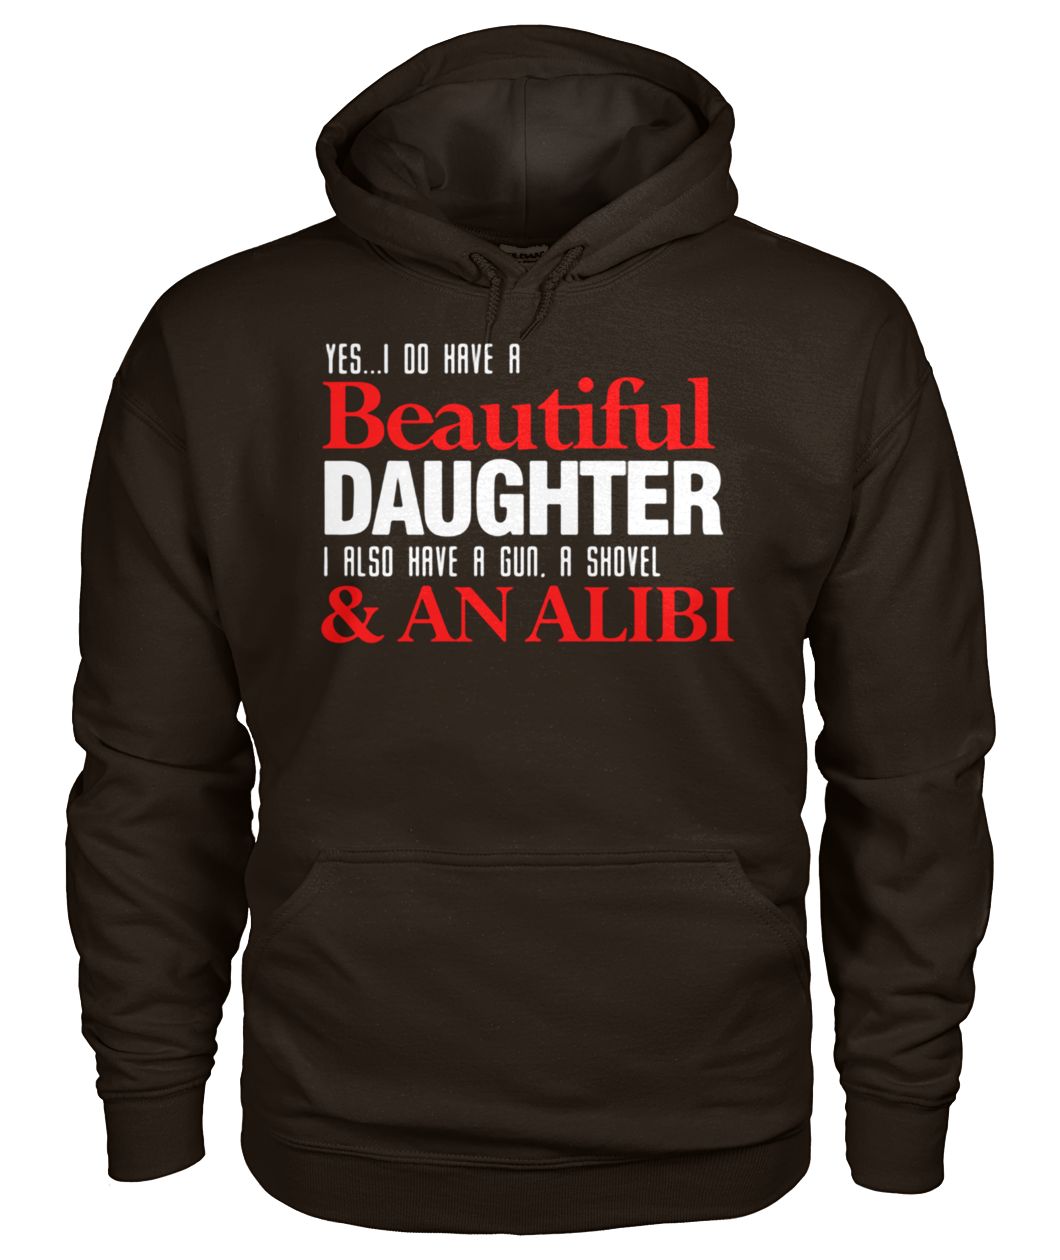 Yes I do have a beautiful daughter I also have a gun a shovel and an alibi hoodie